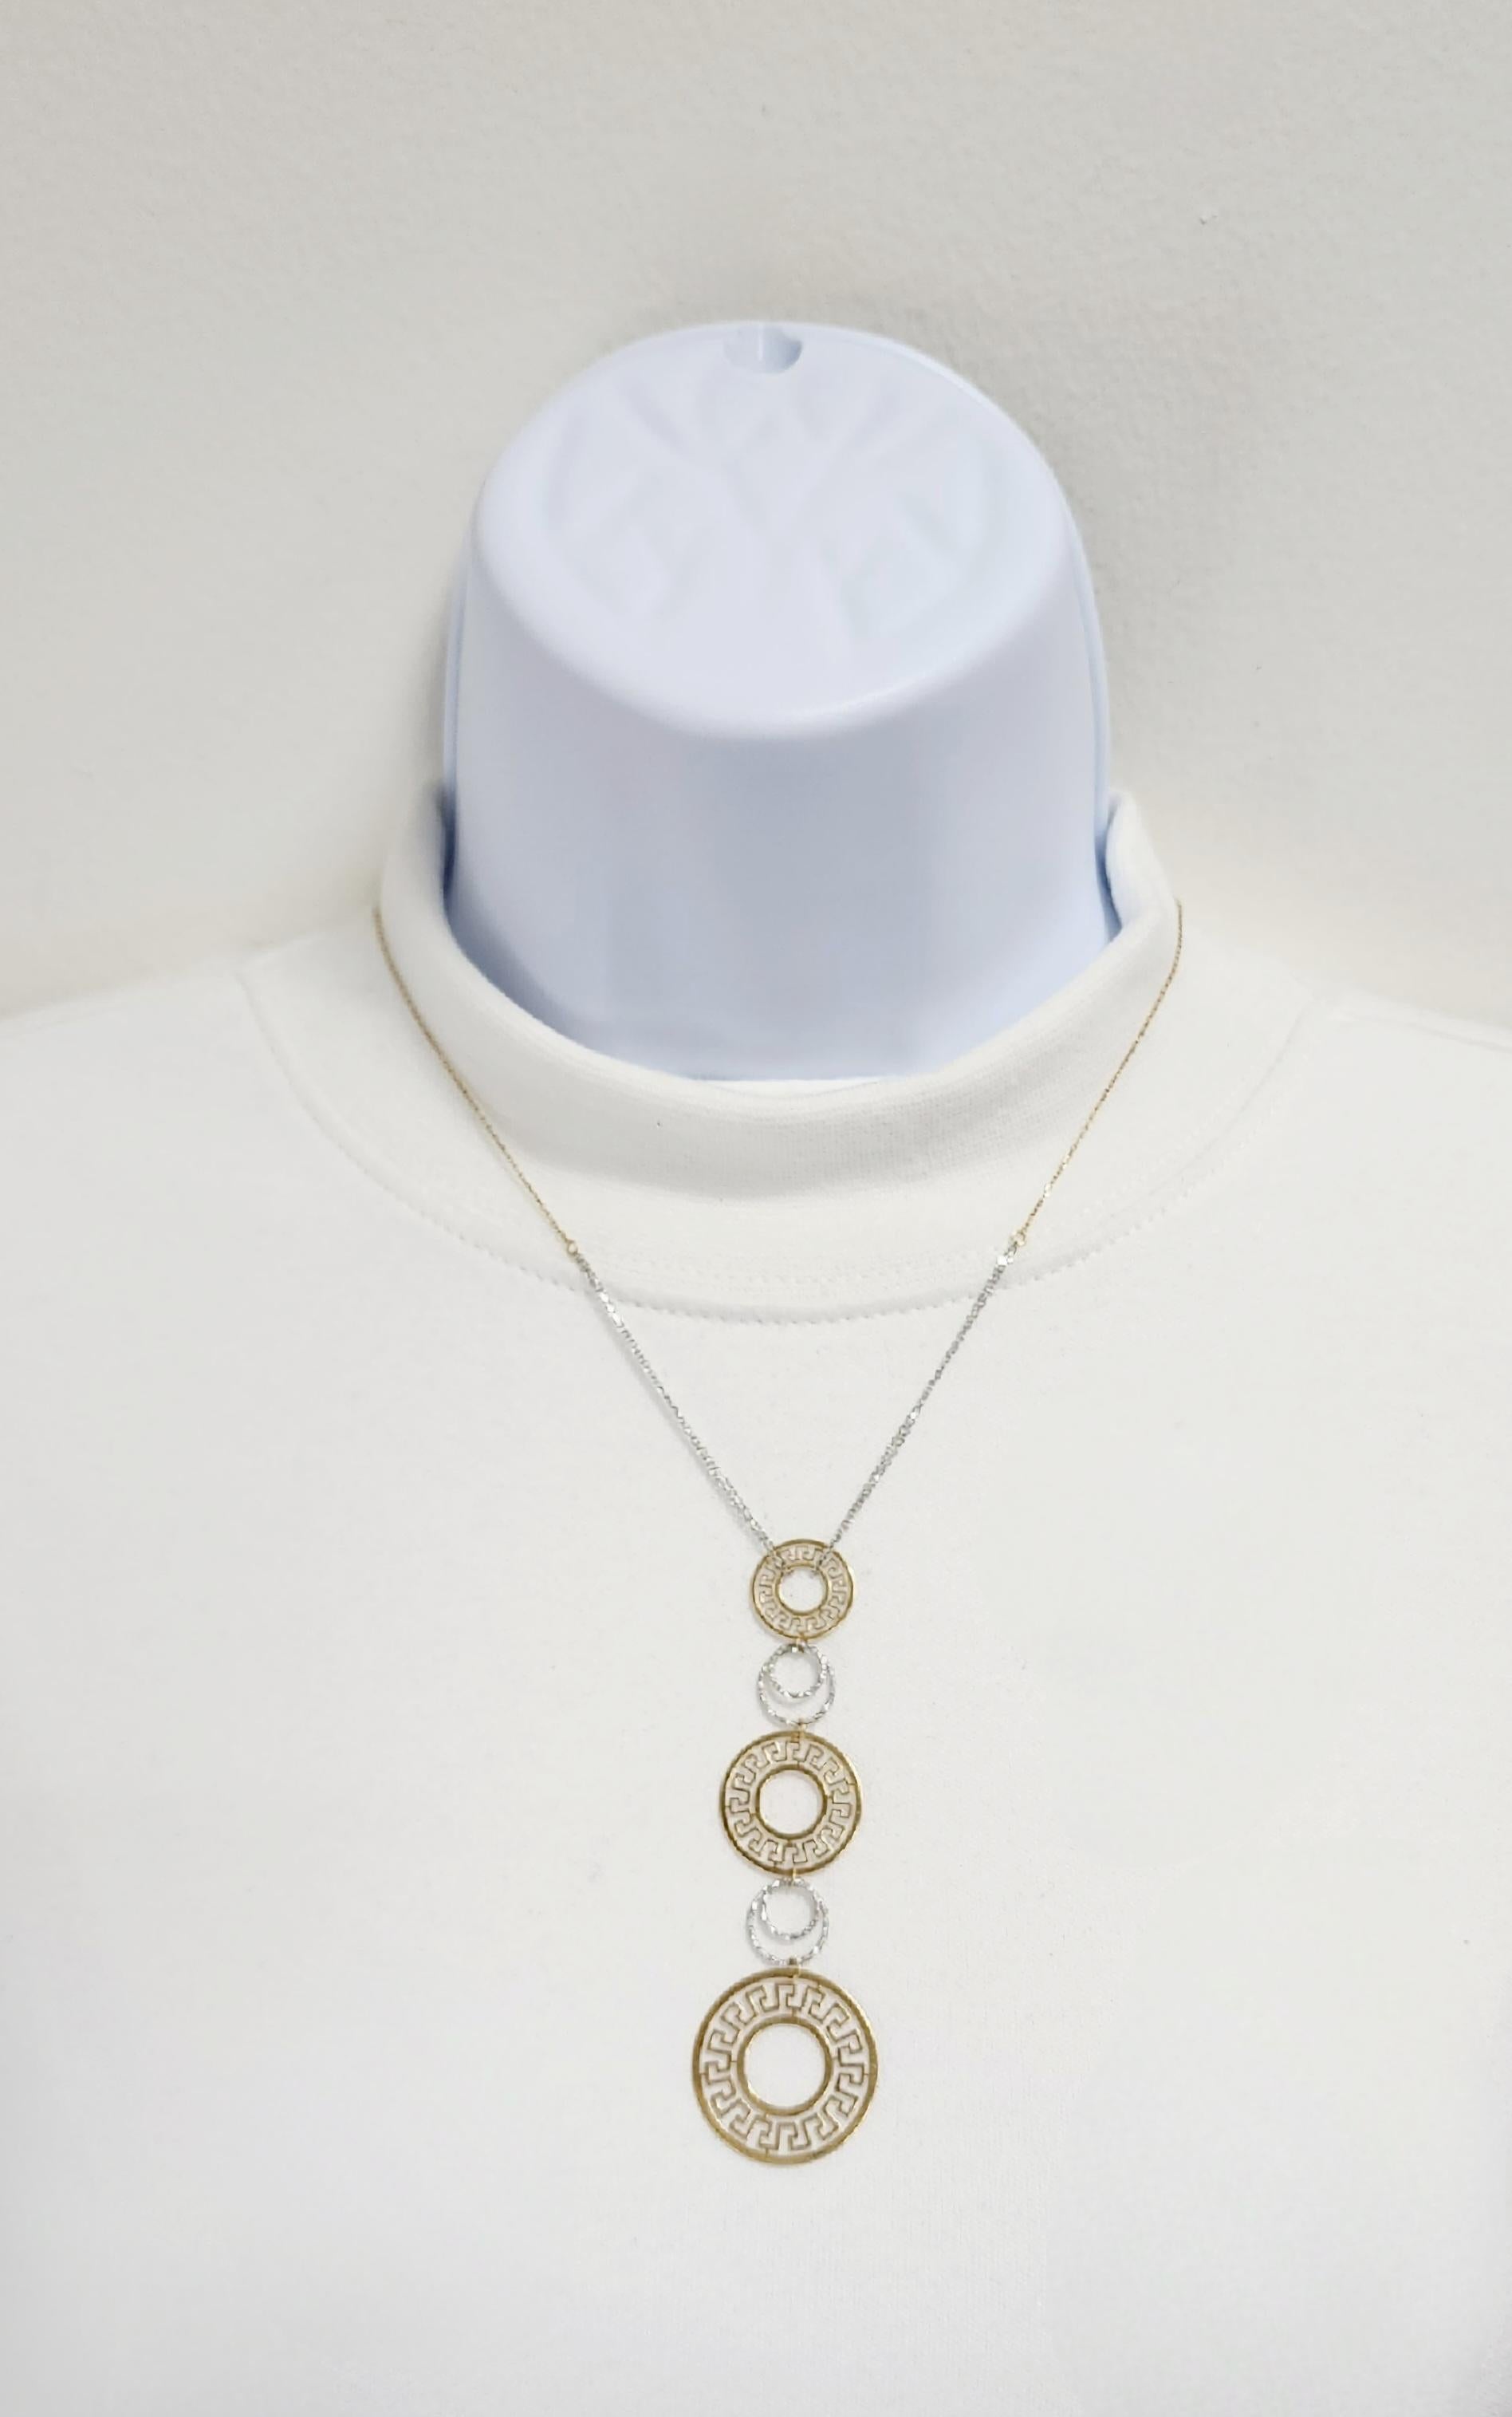 Beautiful circular cut out design pendant necklace handmade in 18k white and yellow gold.  Length of chain is 18